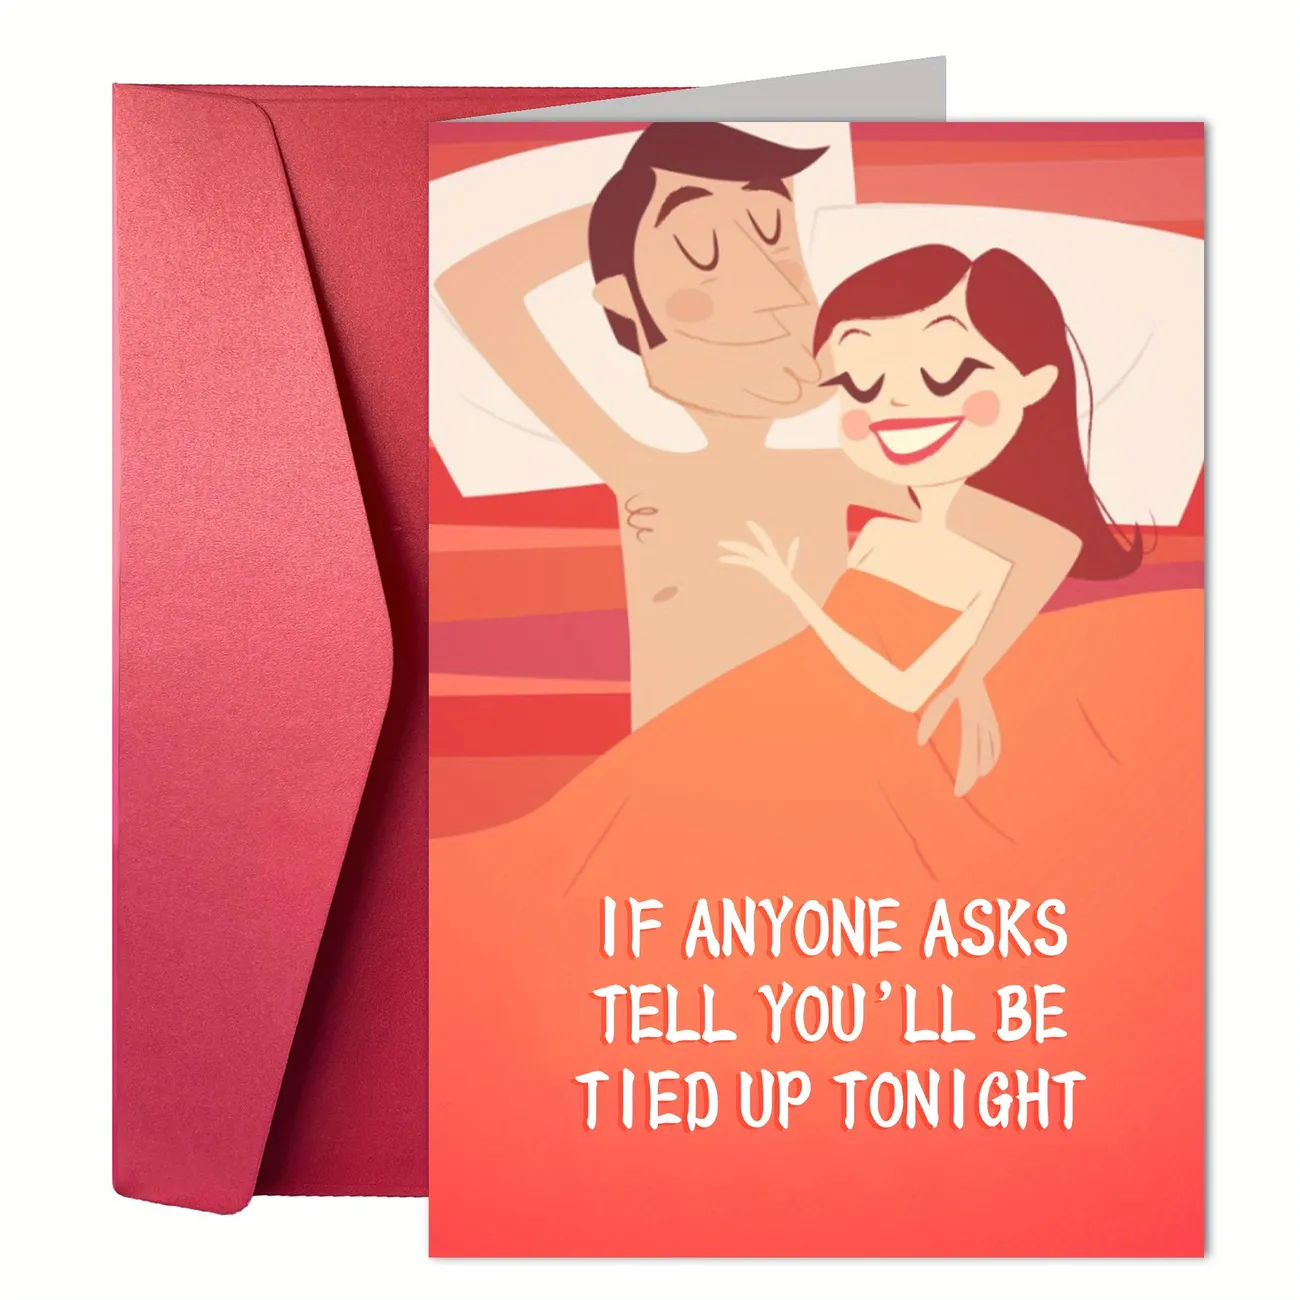 Romantic Anniversary Card For Him/her - Tied Up Tonight - Funny Gift Birthday Cards For Husband/wife/man/woman/boyfriend/girlfriend picture